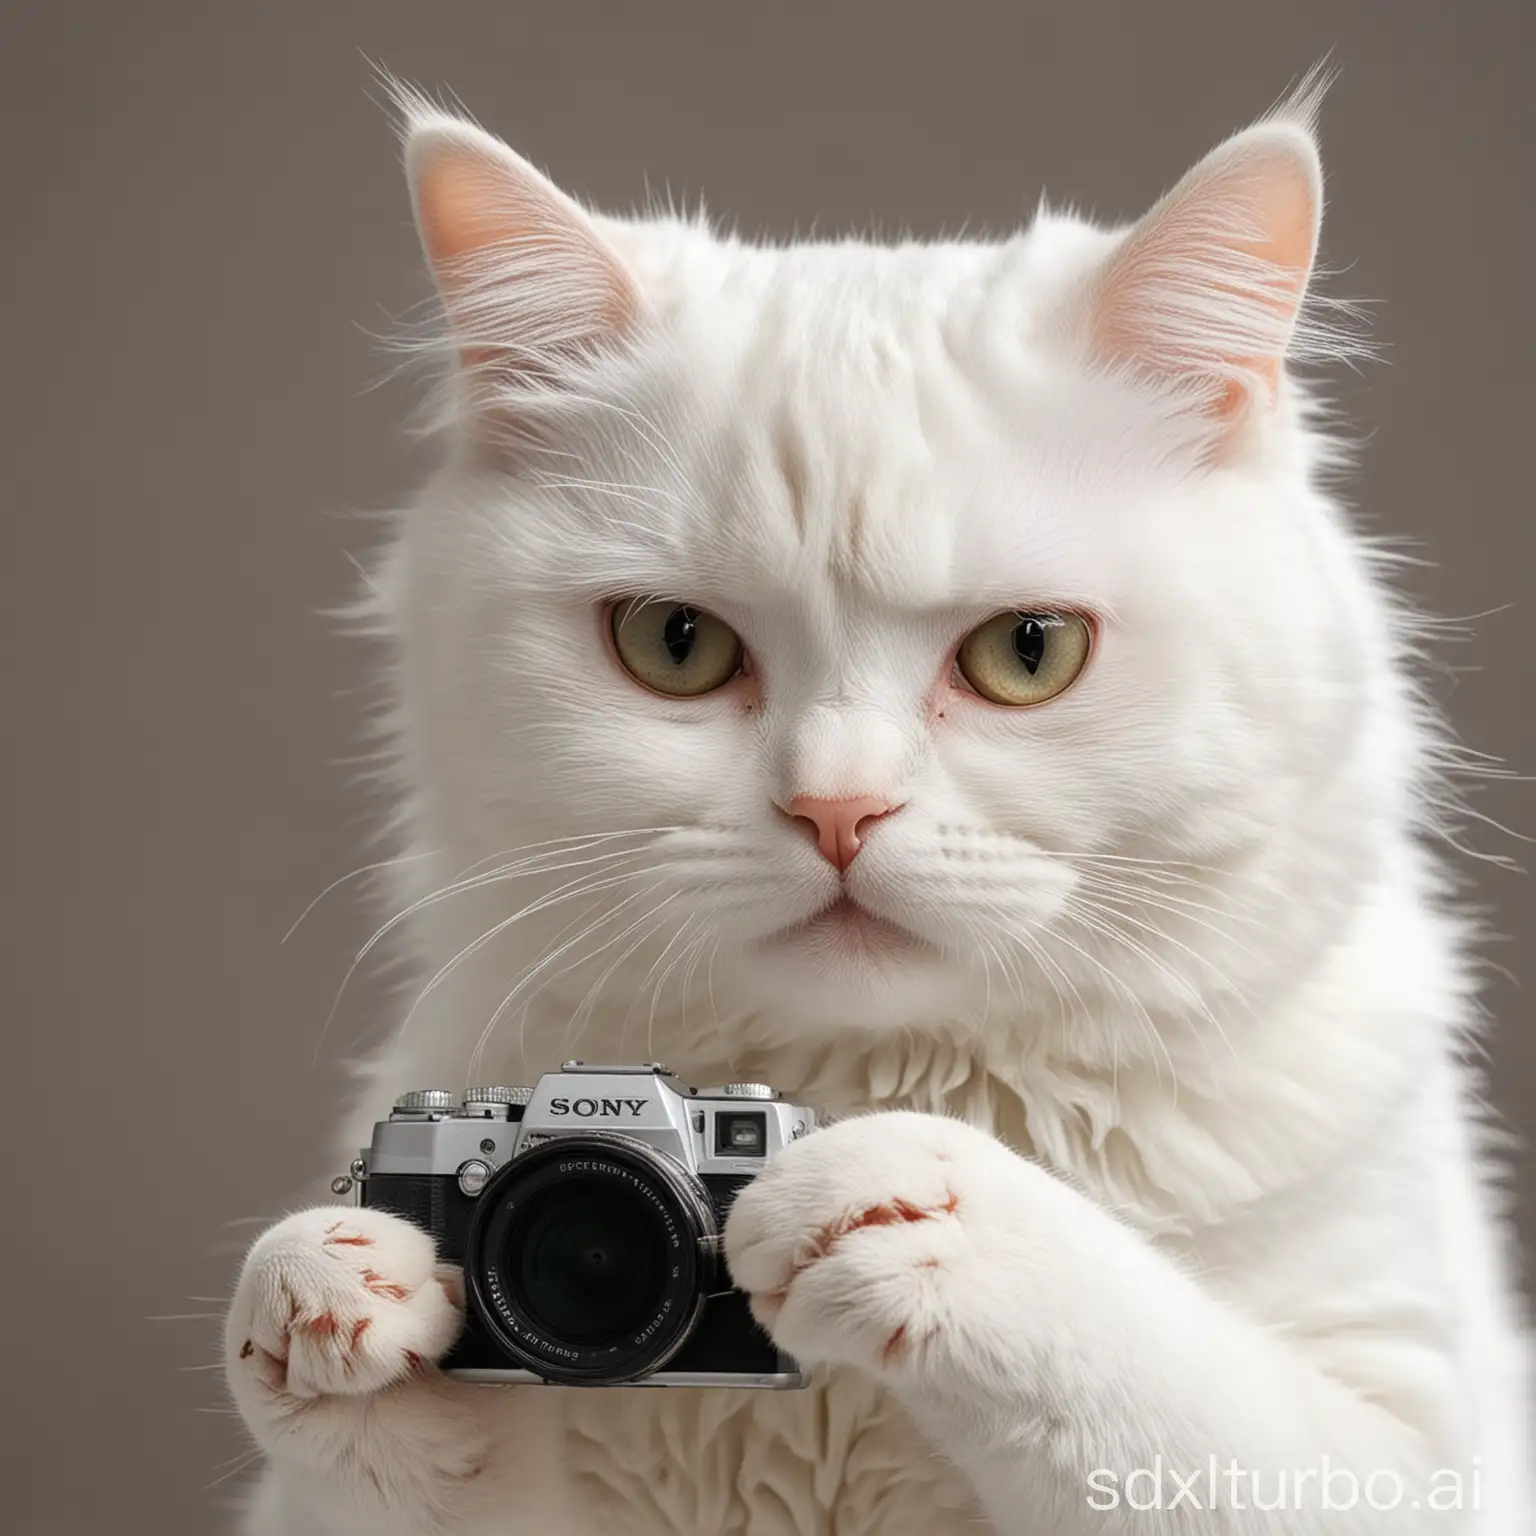 white funny cat unhappy with digital camera sony in his hands